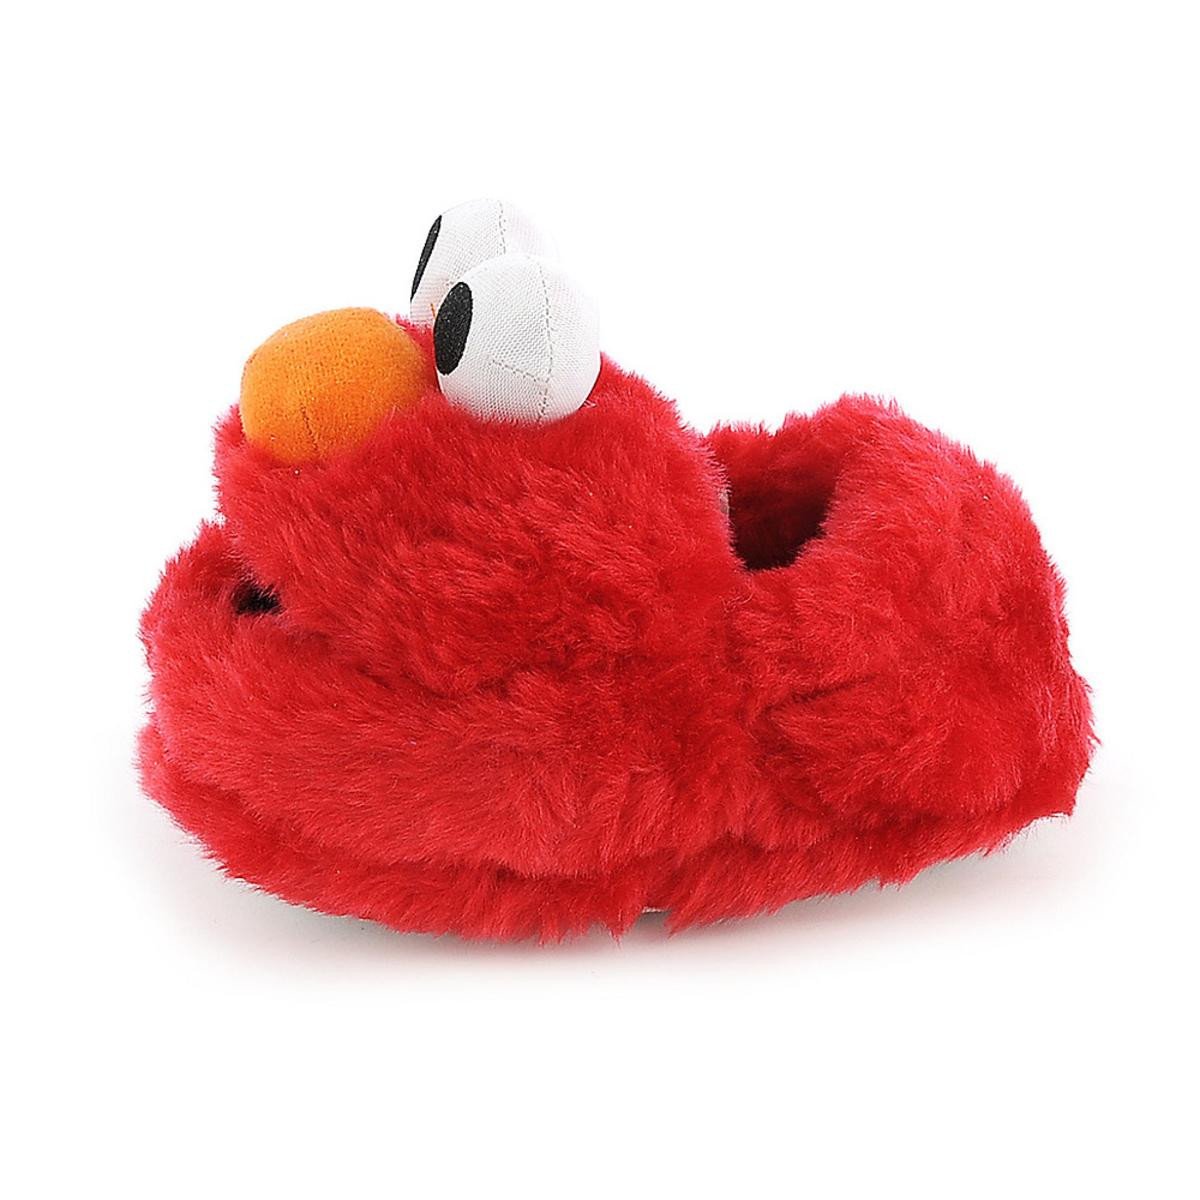 Stride Rite for Toddlers: Elmo Red Slippers